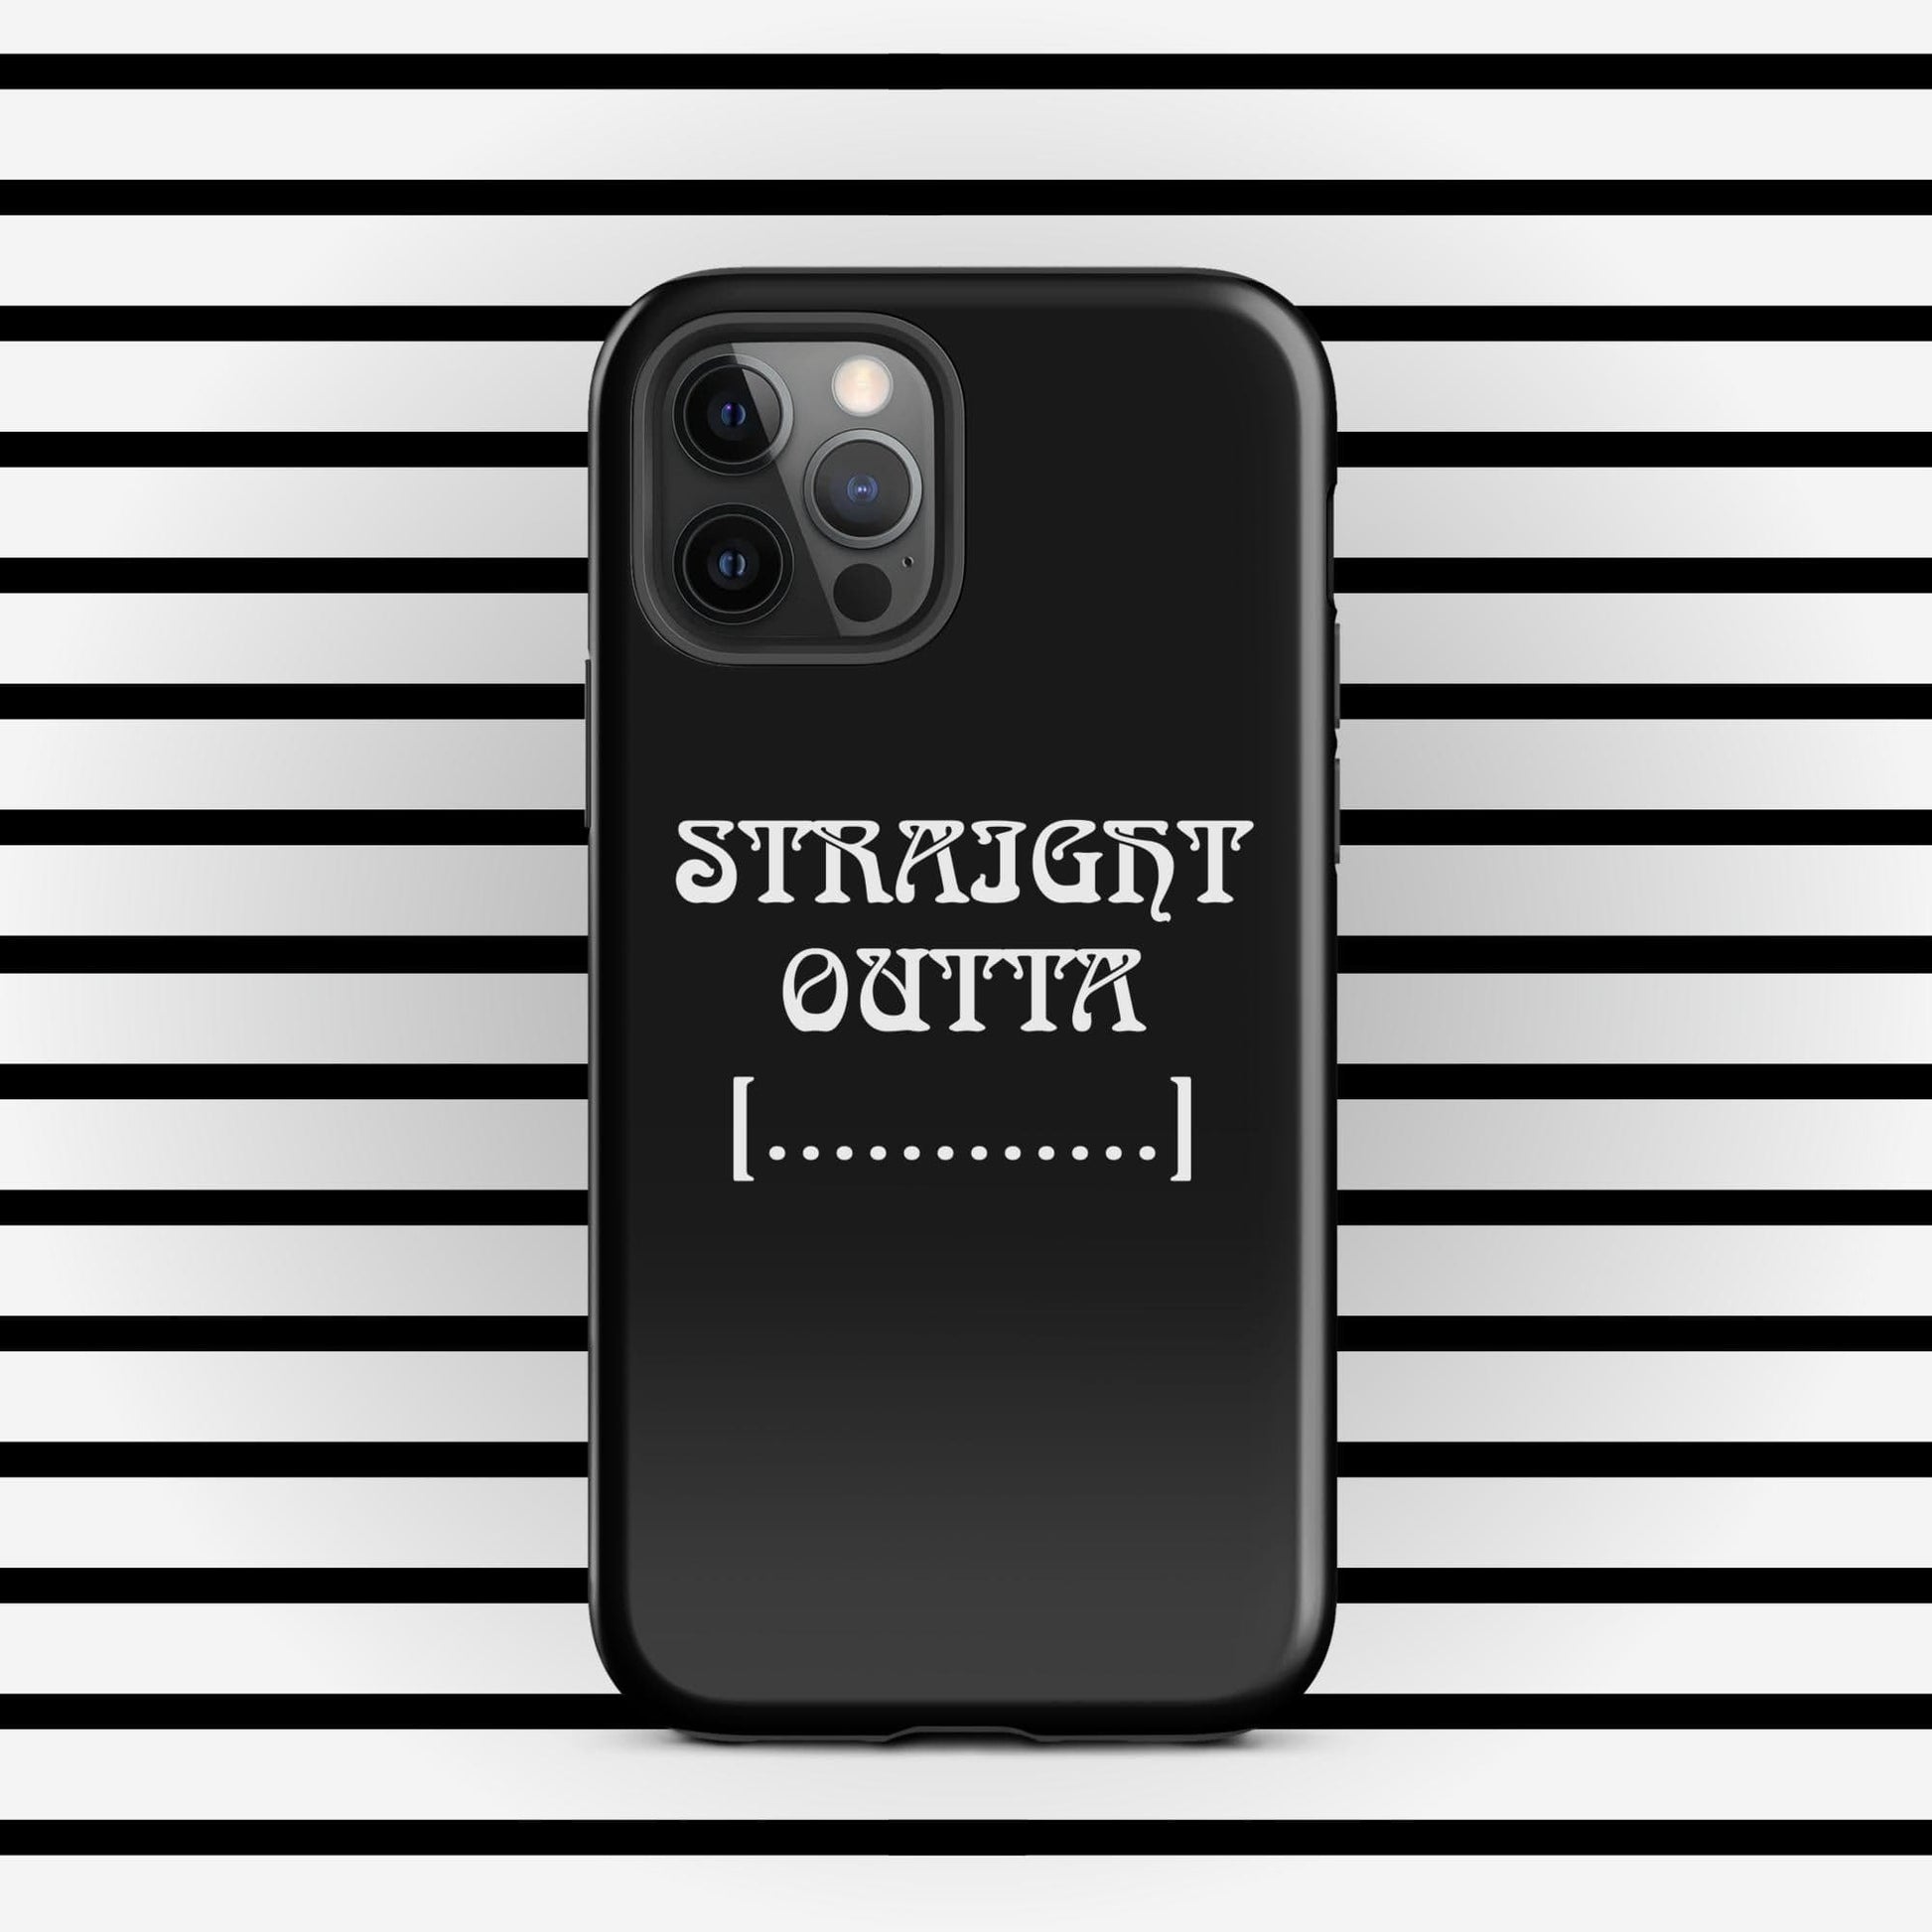 Trendyguard iPhone 12 Pro STRAIGHT OUTTA | [Custom] Tough Case for iPhone®